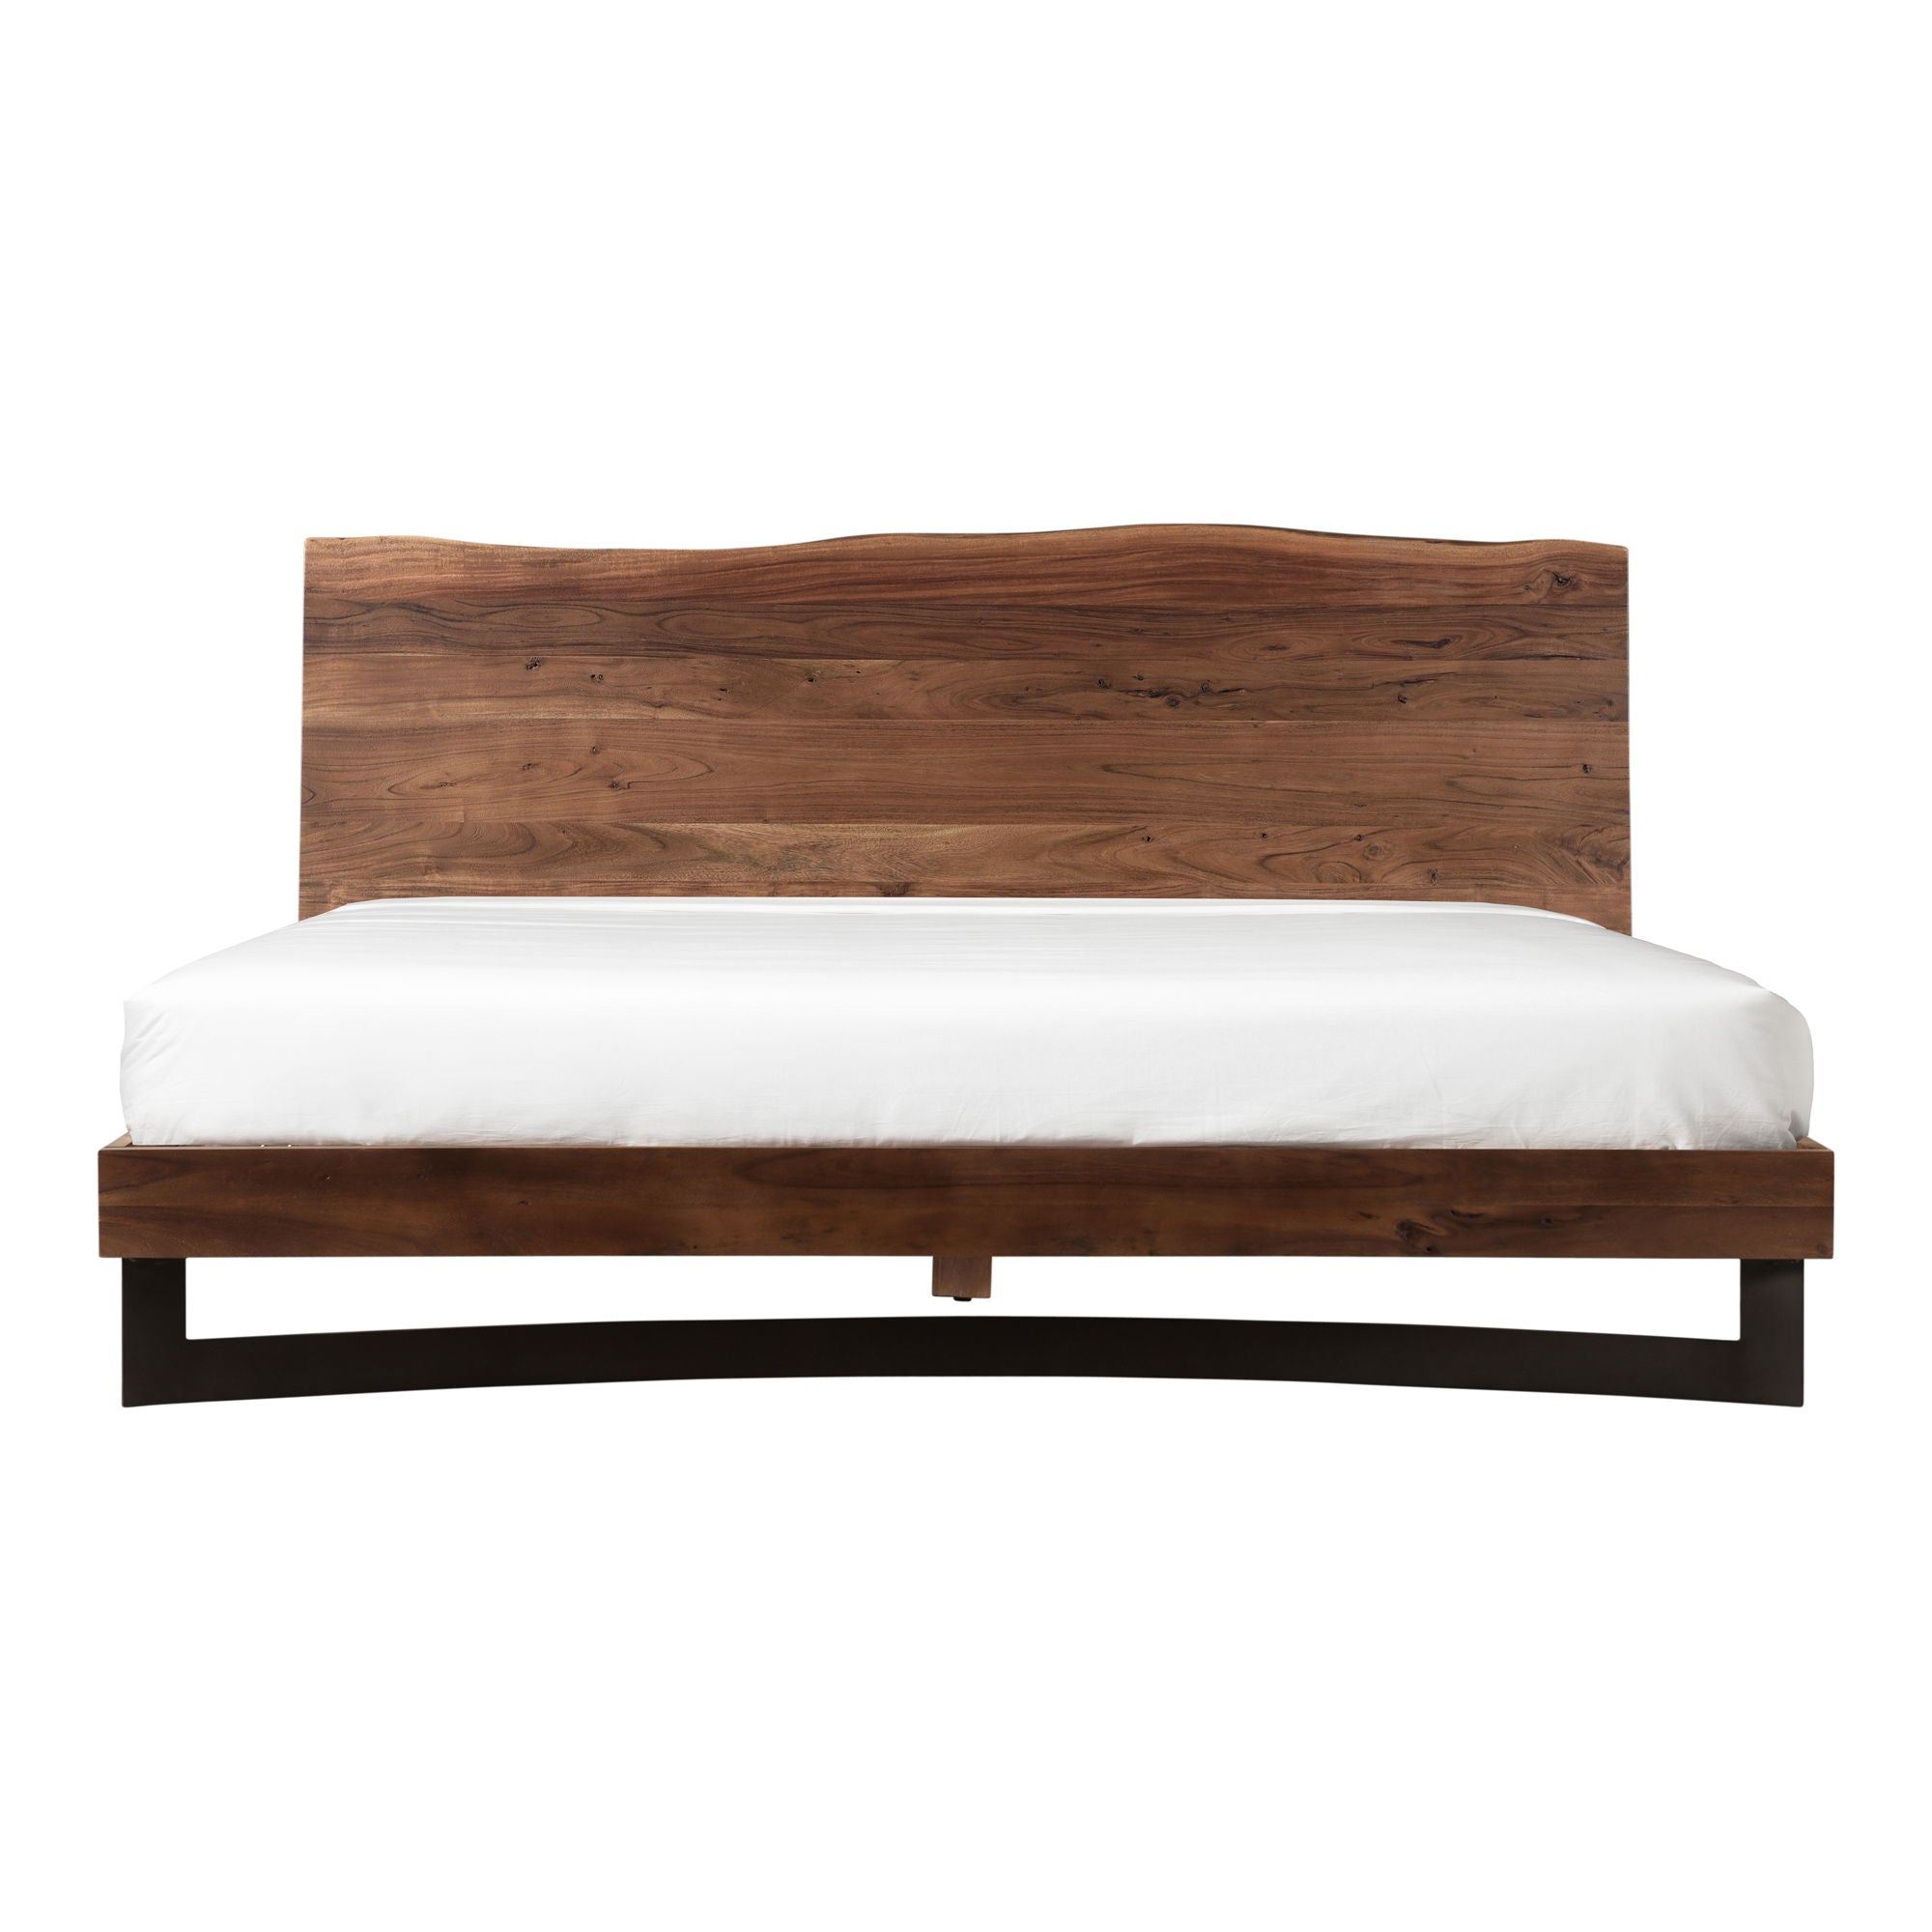 Bent - King Size Bed - Natural Stain